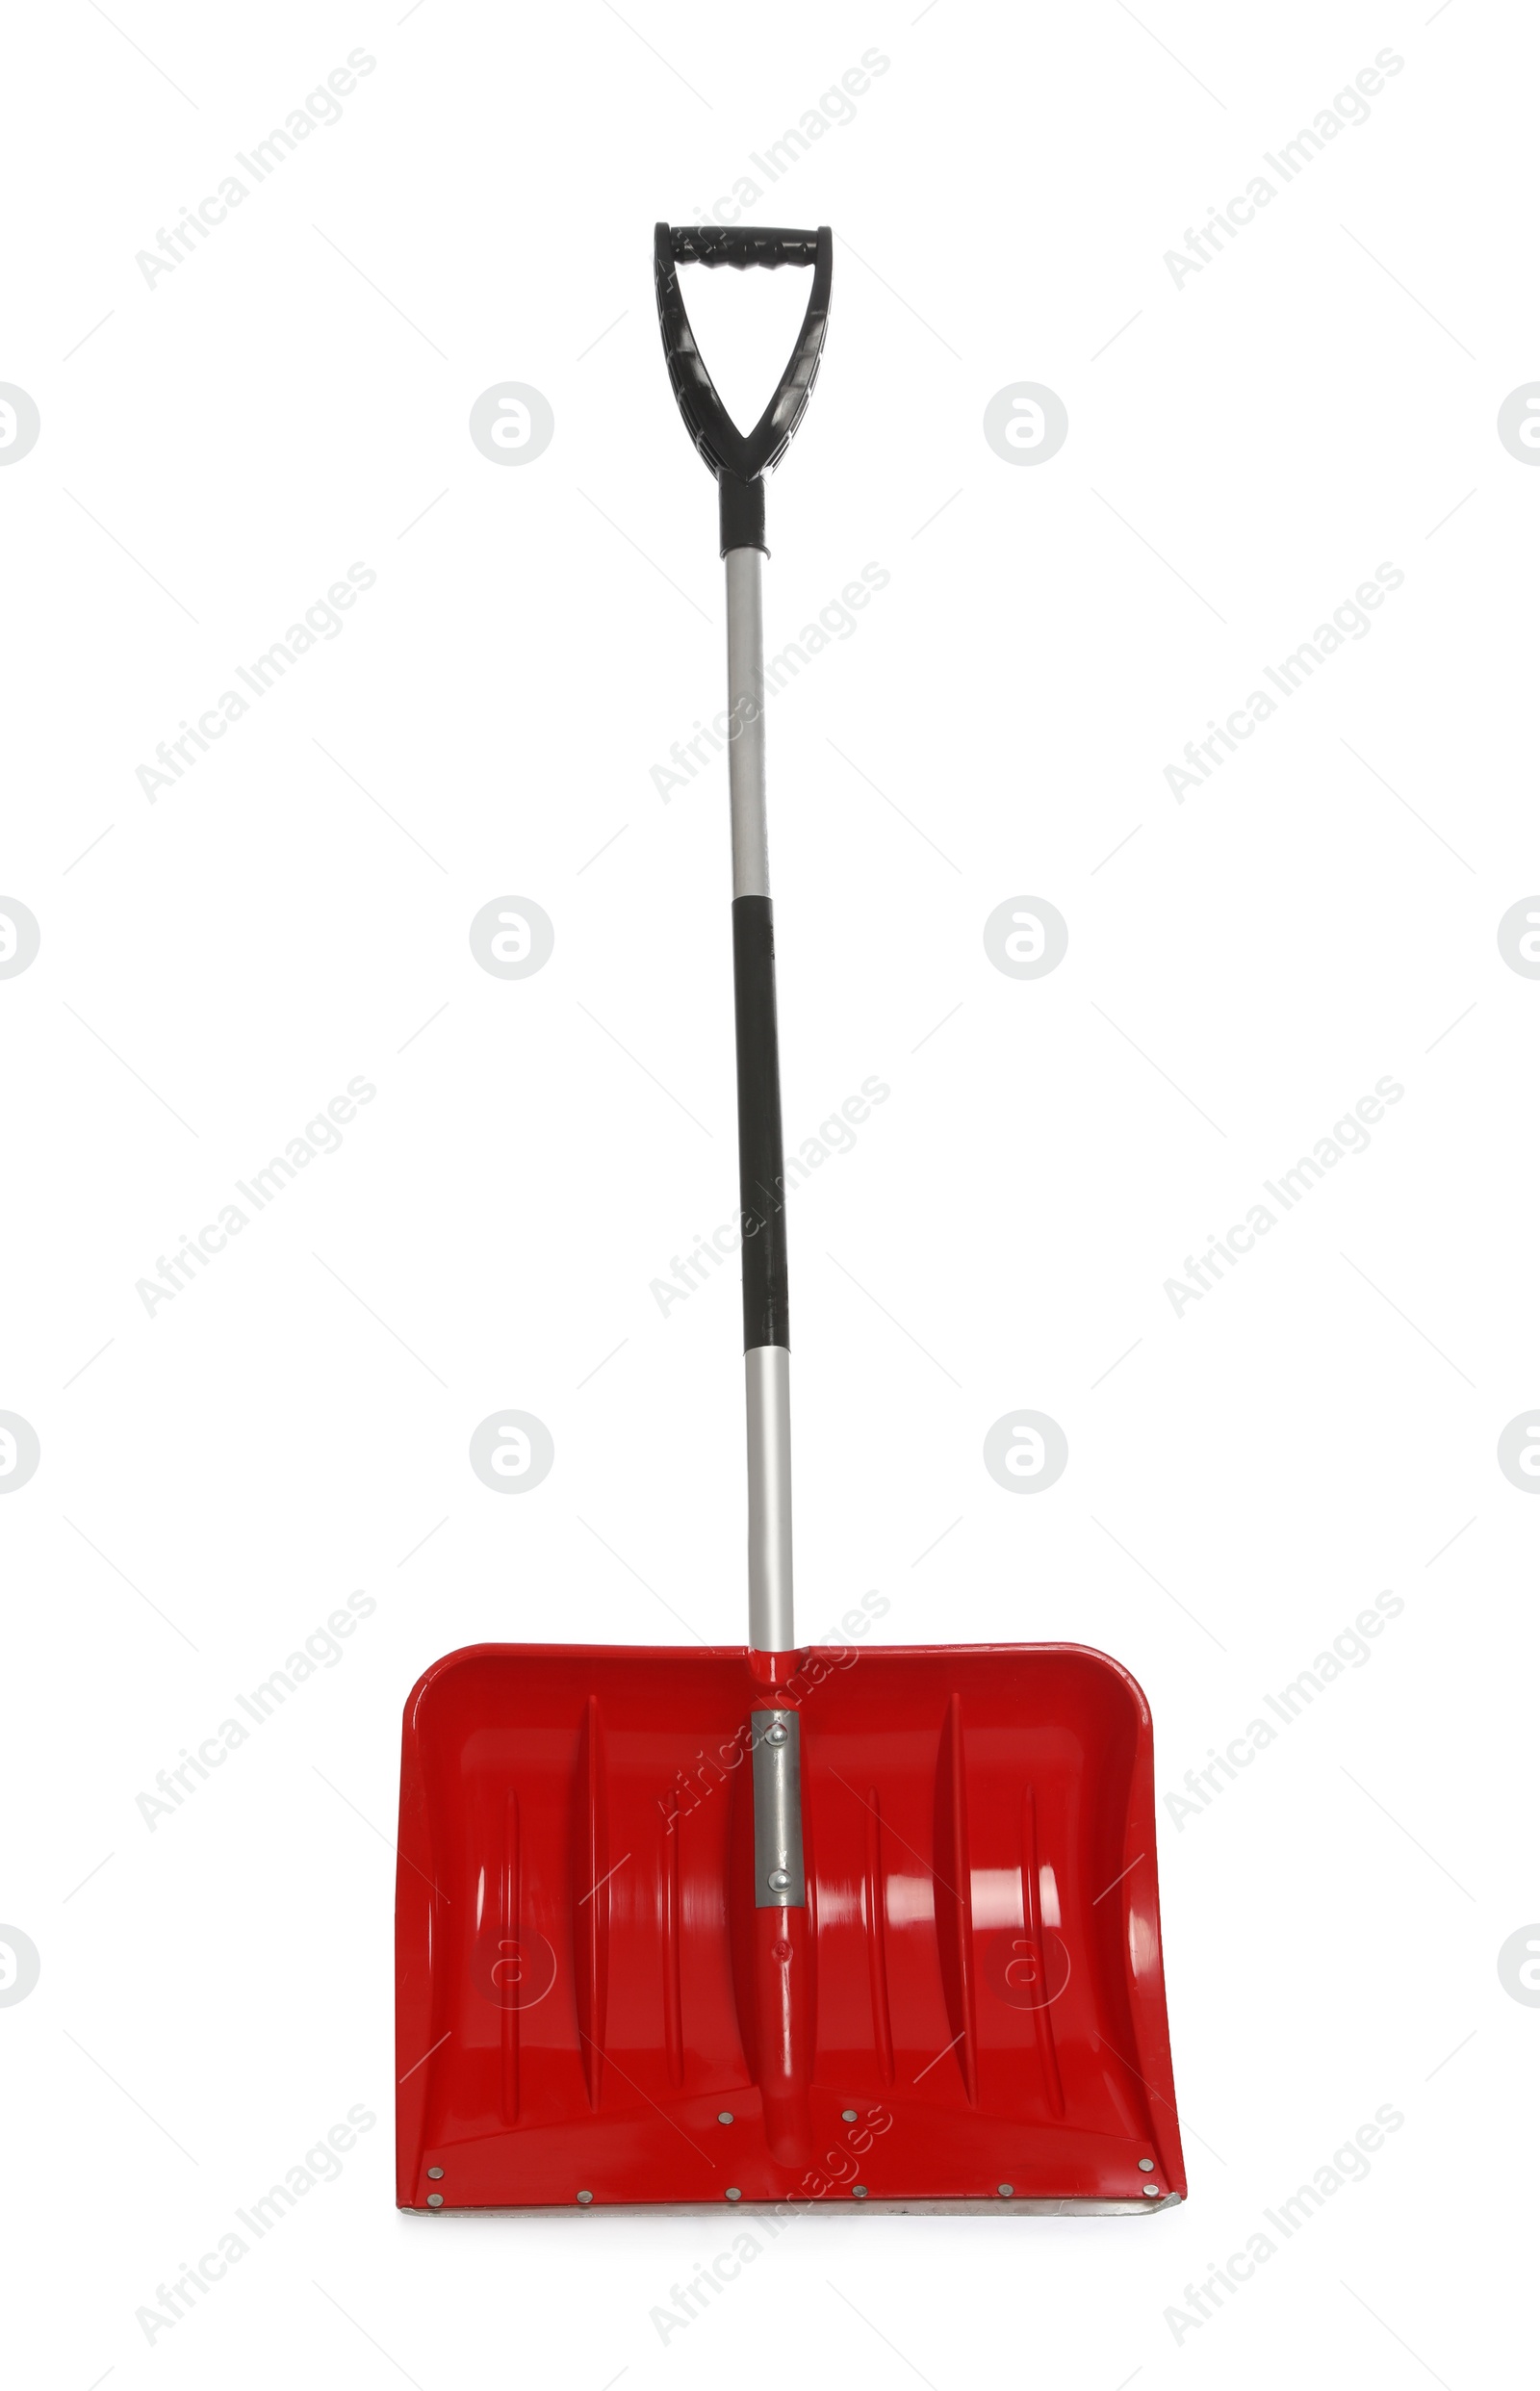 Photo of Red snow cleaning shovel isolated on white